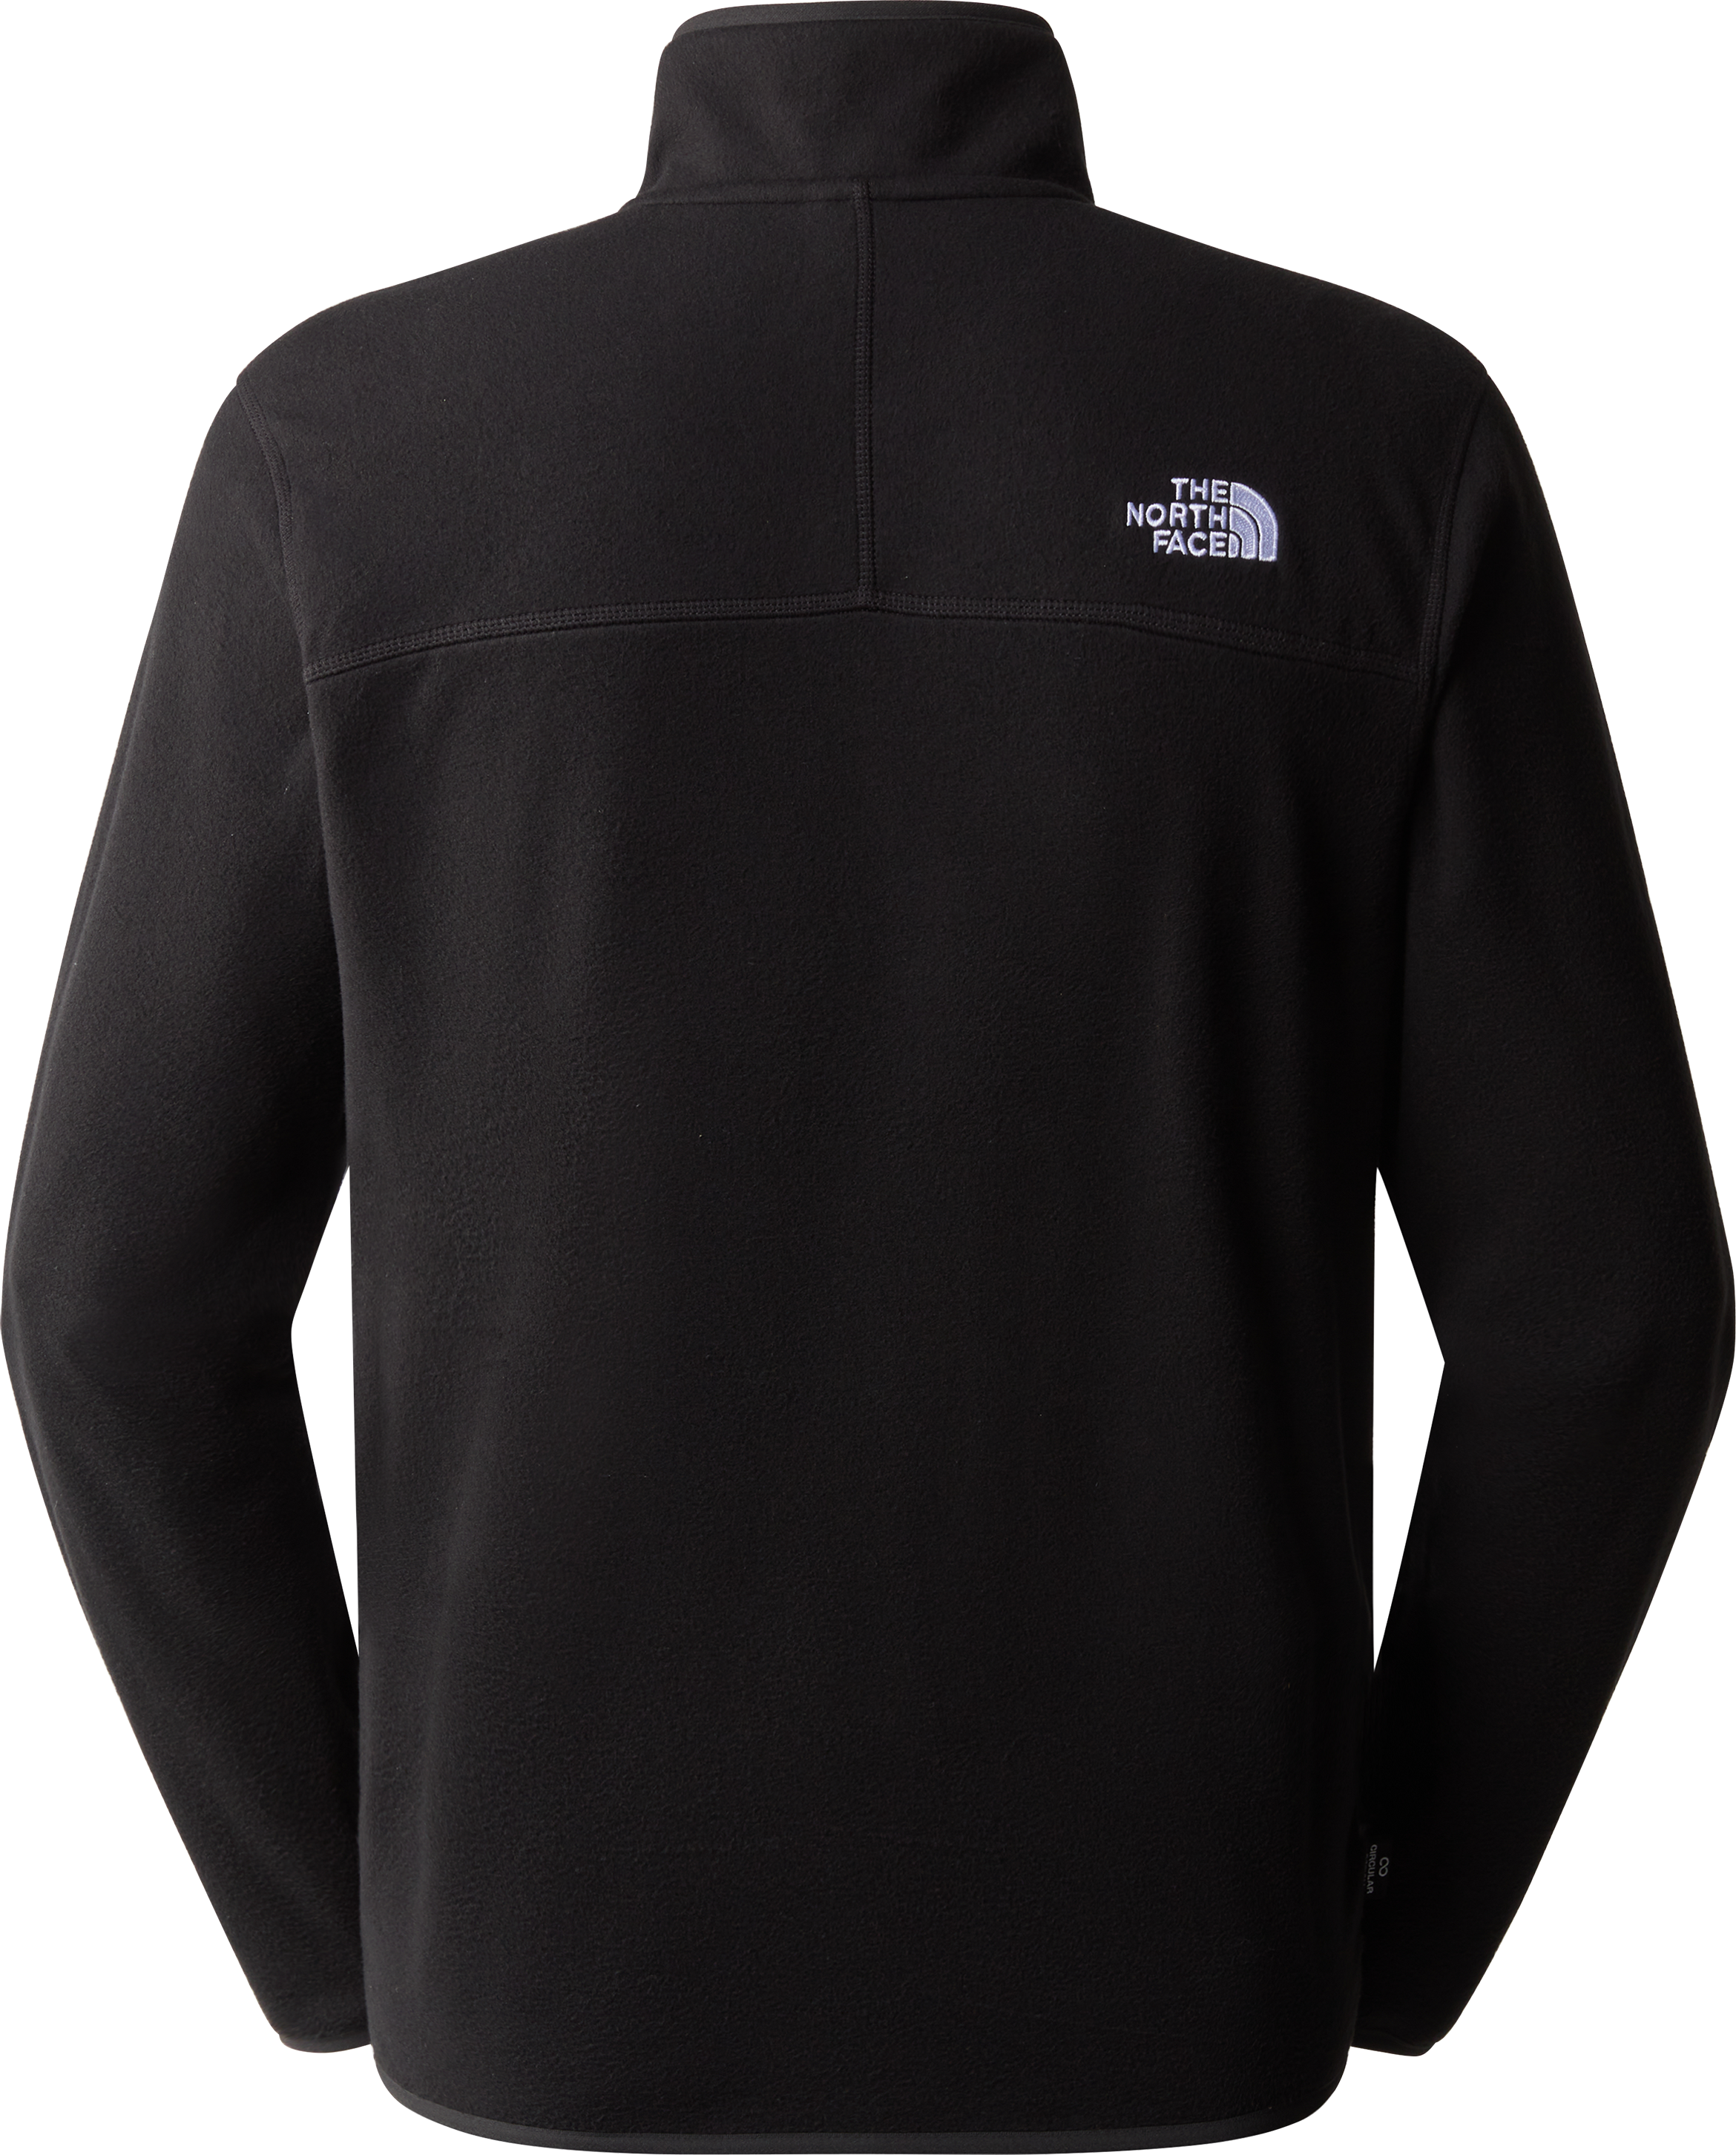 Stay Warm and Stylish with The North Face Microvelour Glacier 1/4 Zip